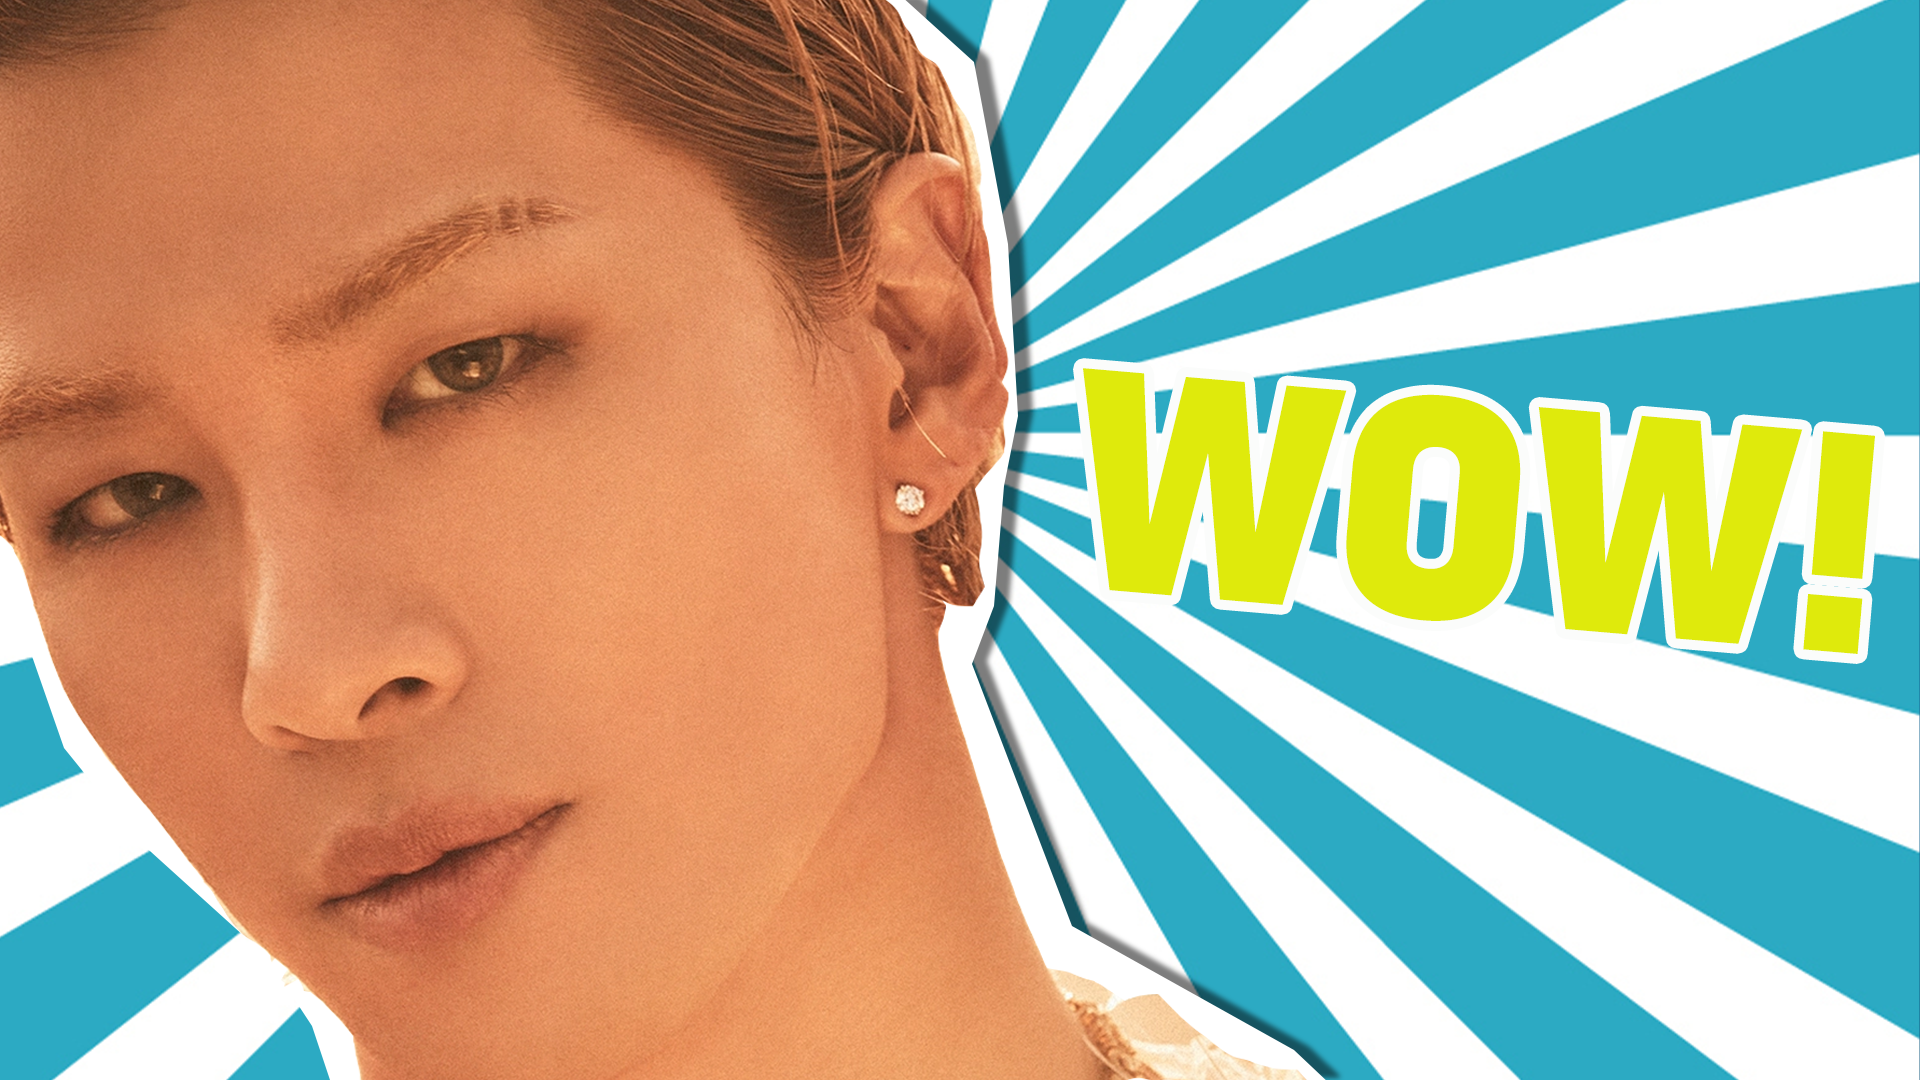 Woah, official VIP alert! You got 100% in this quiz, which can only mean one thing...you're a true Taeyang super fan! Congrats!